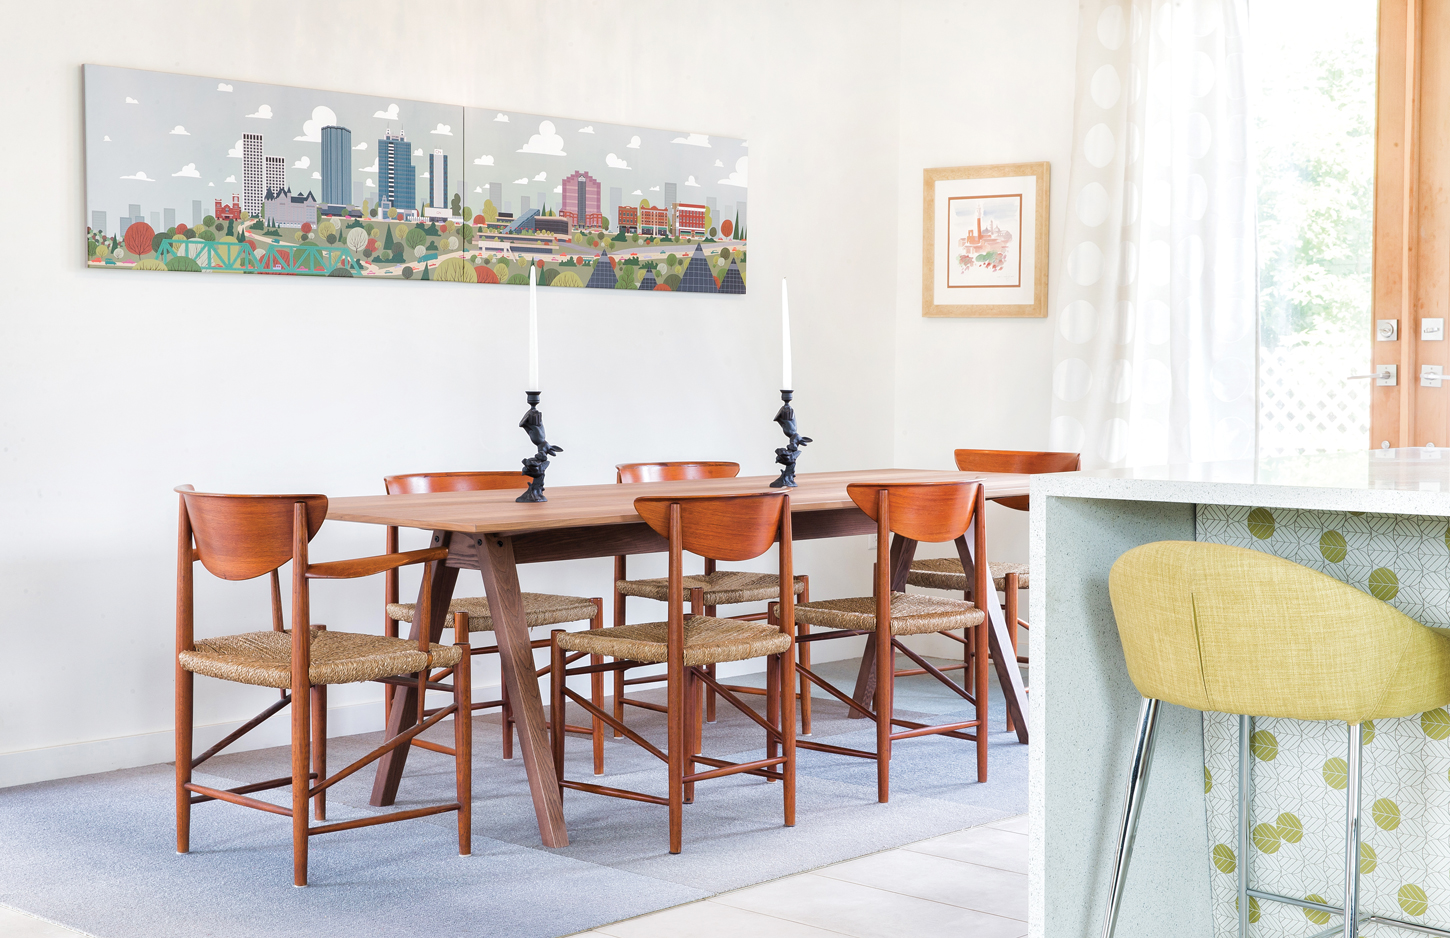 Chairs from Scandinavian Modern; table from IKEA; cityscape print by Jason Blower